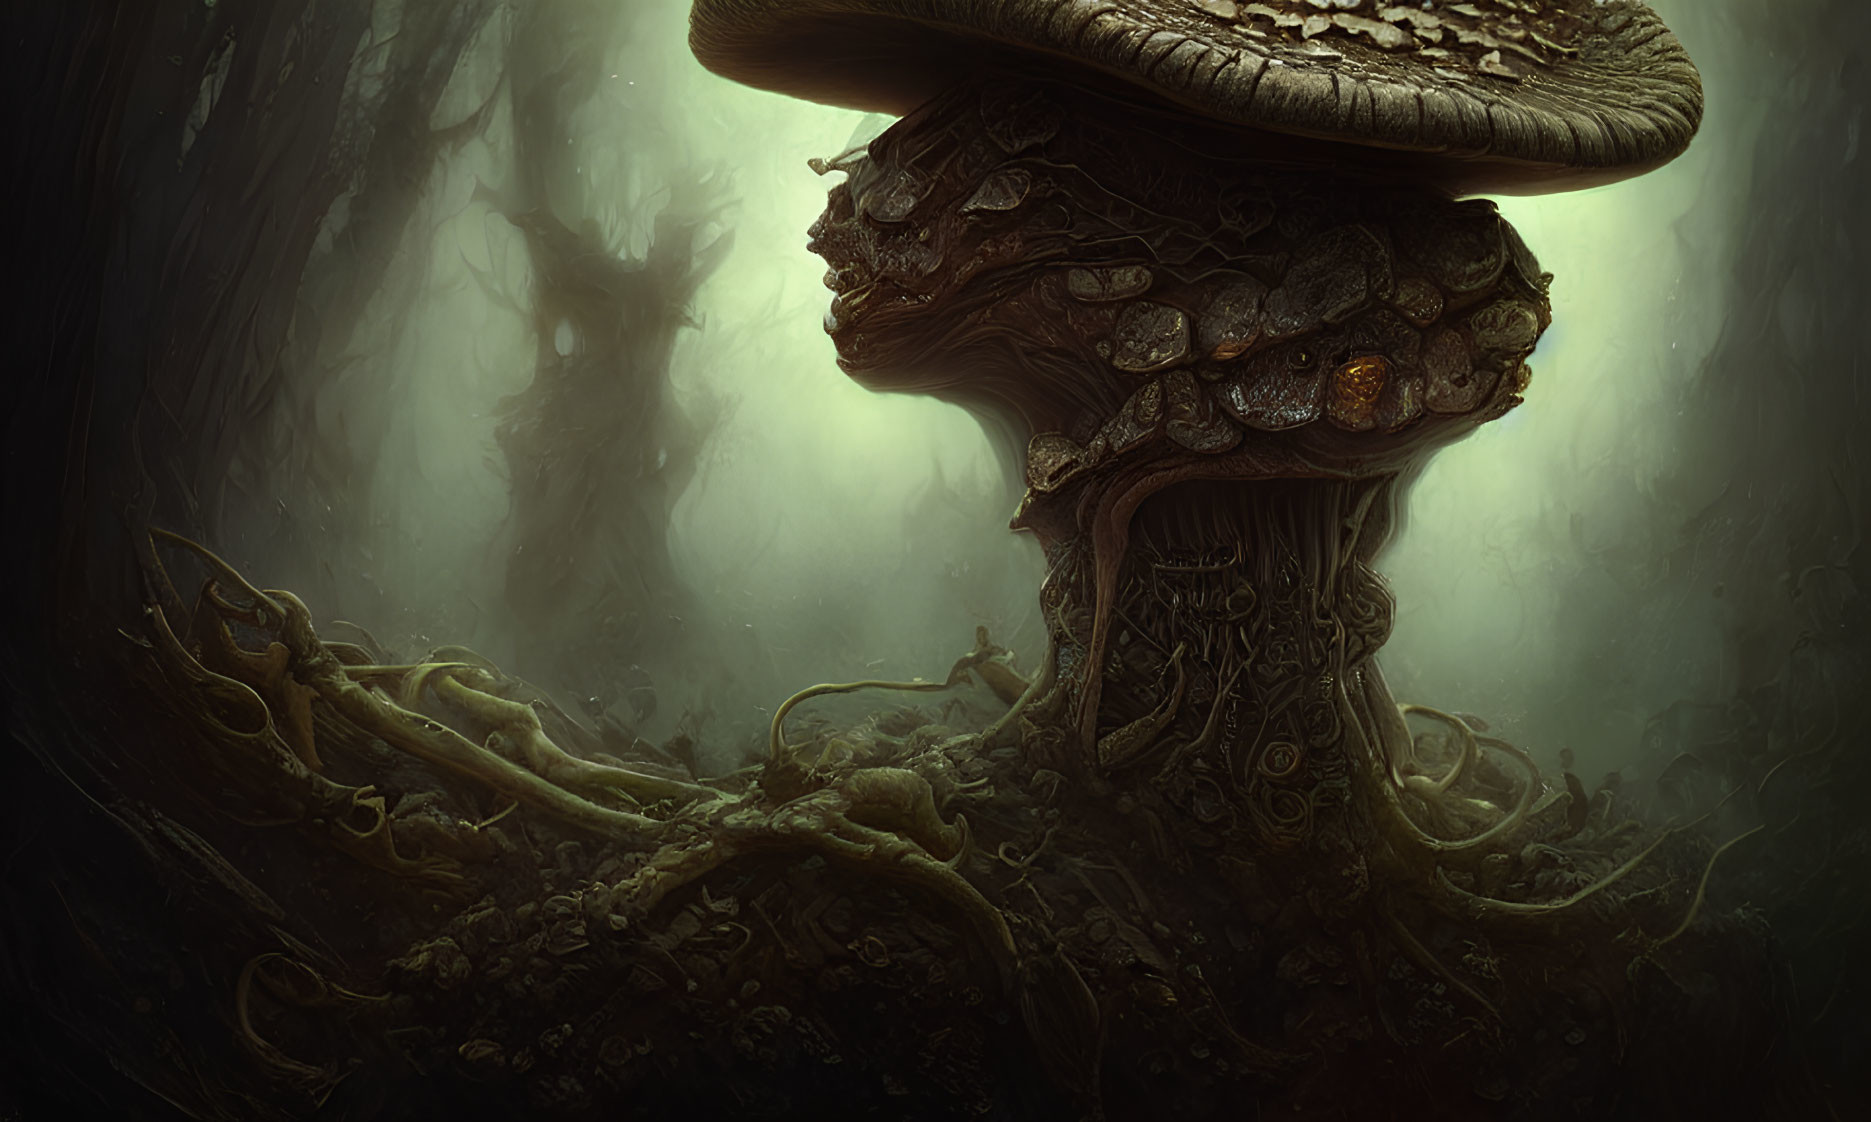 Ethereal forest scene with mystical mushroom structure and twisted vines